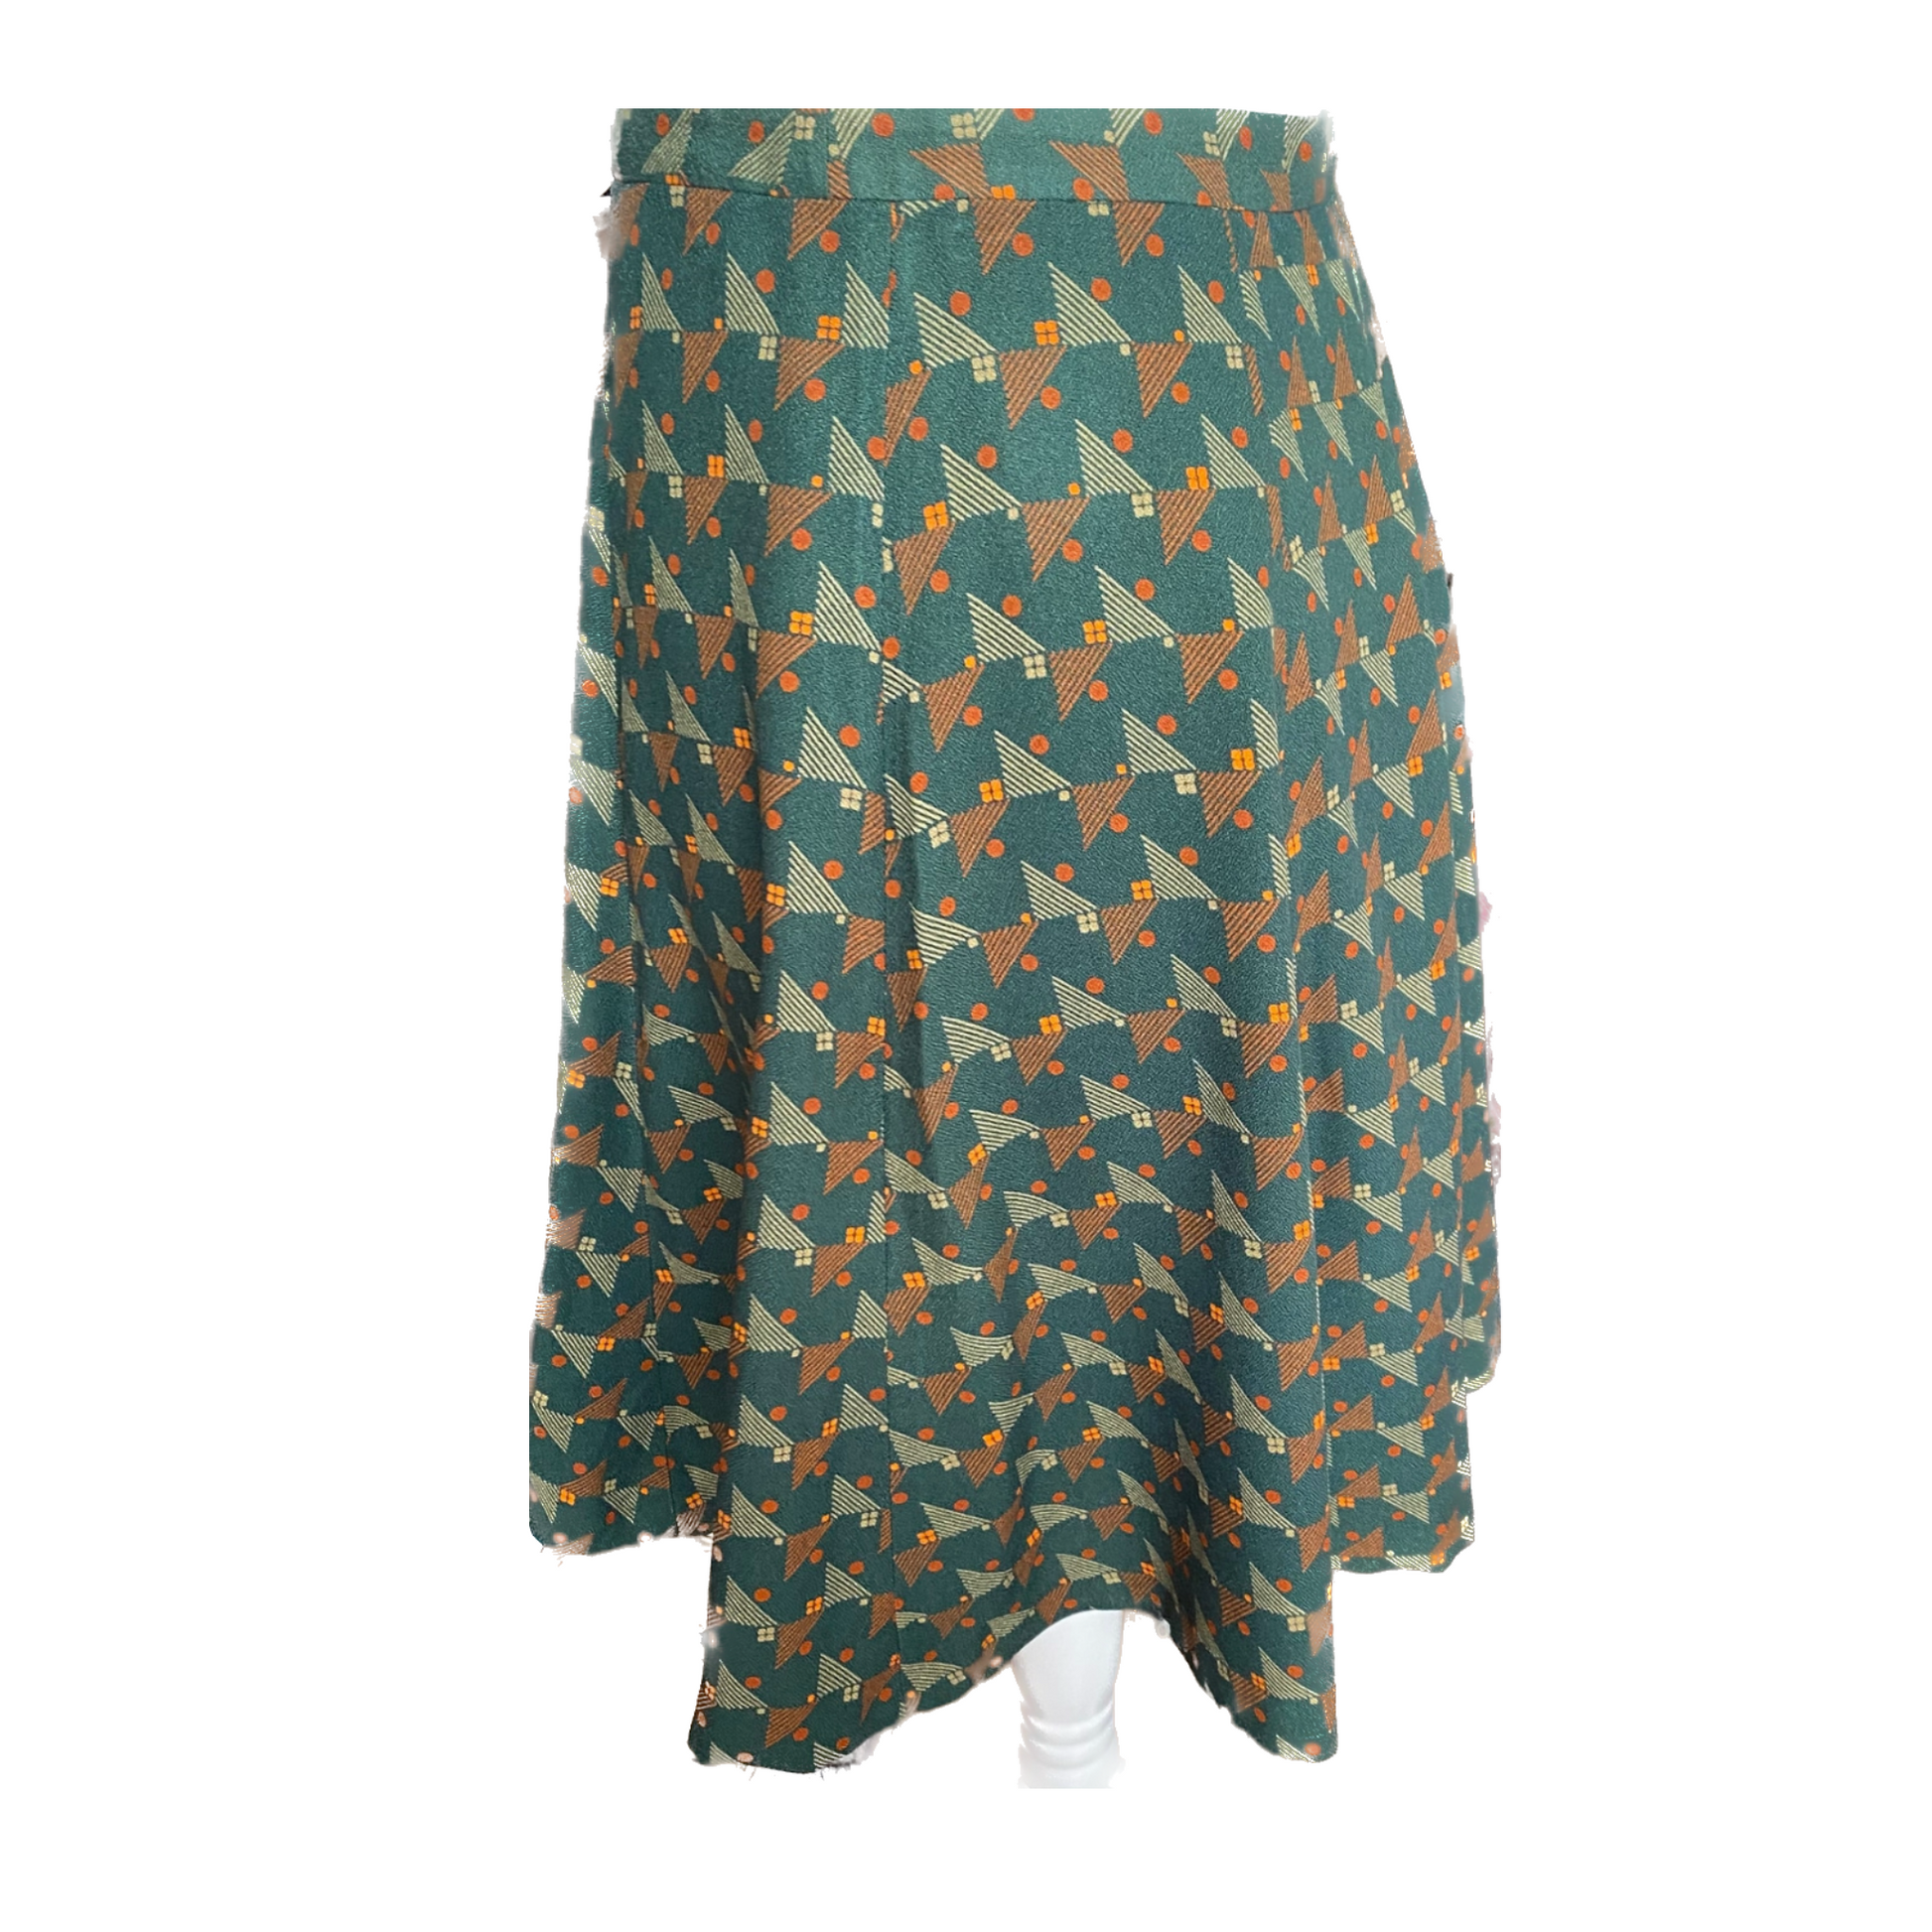 Stylish green and orange patterned skirt - Perfect with jumpers and blouses